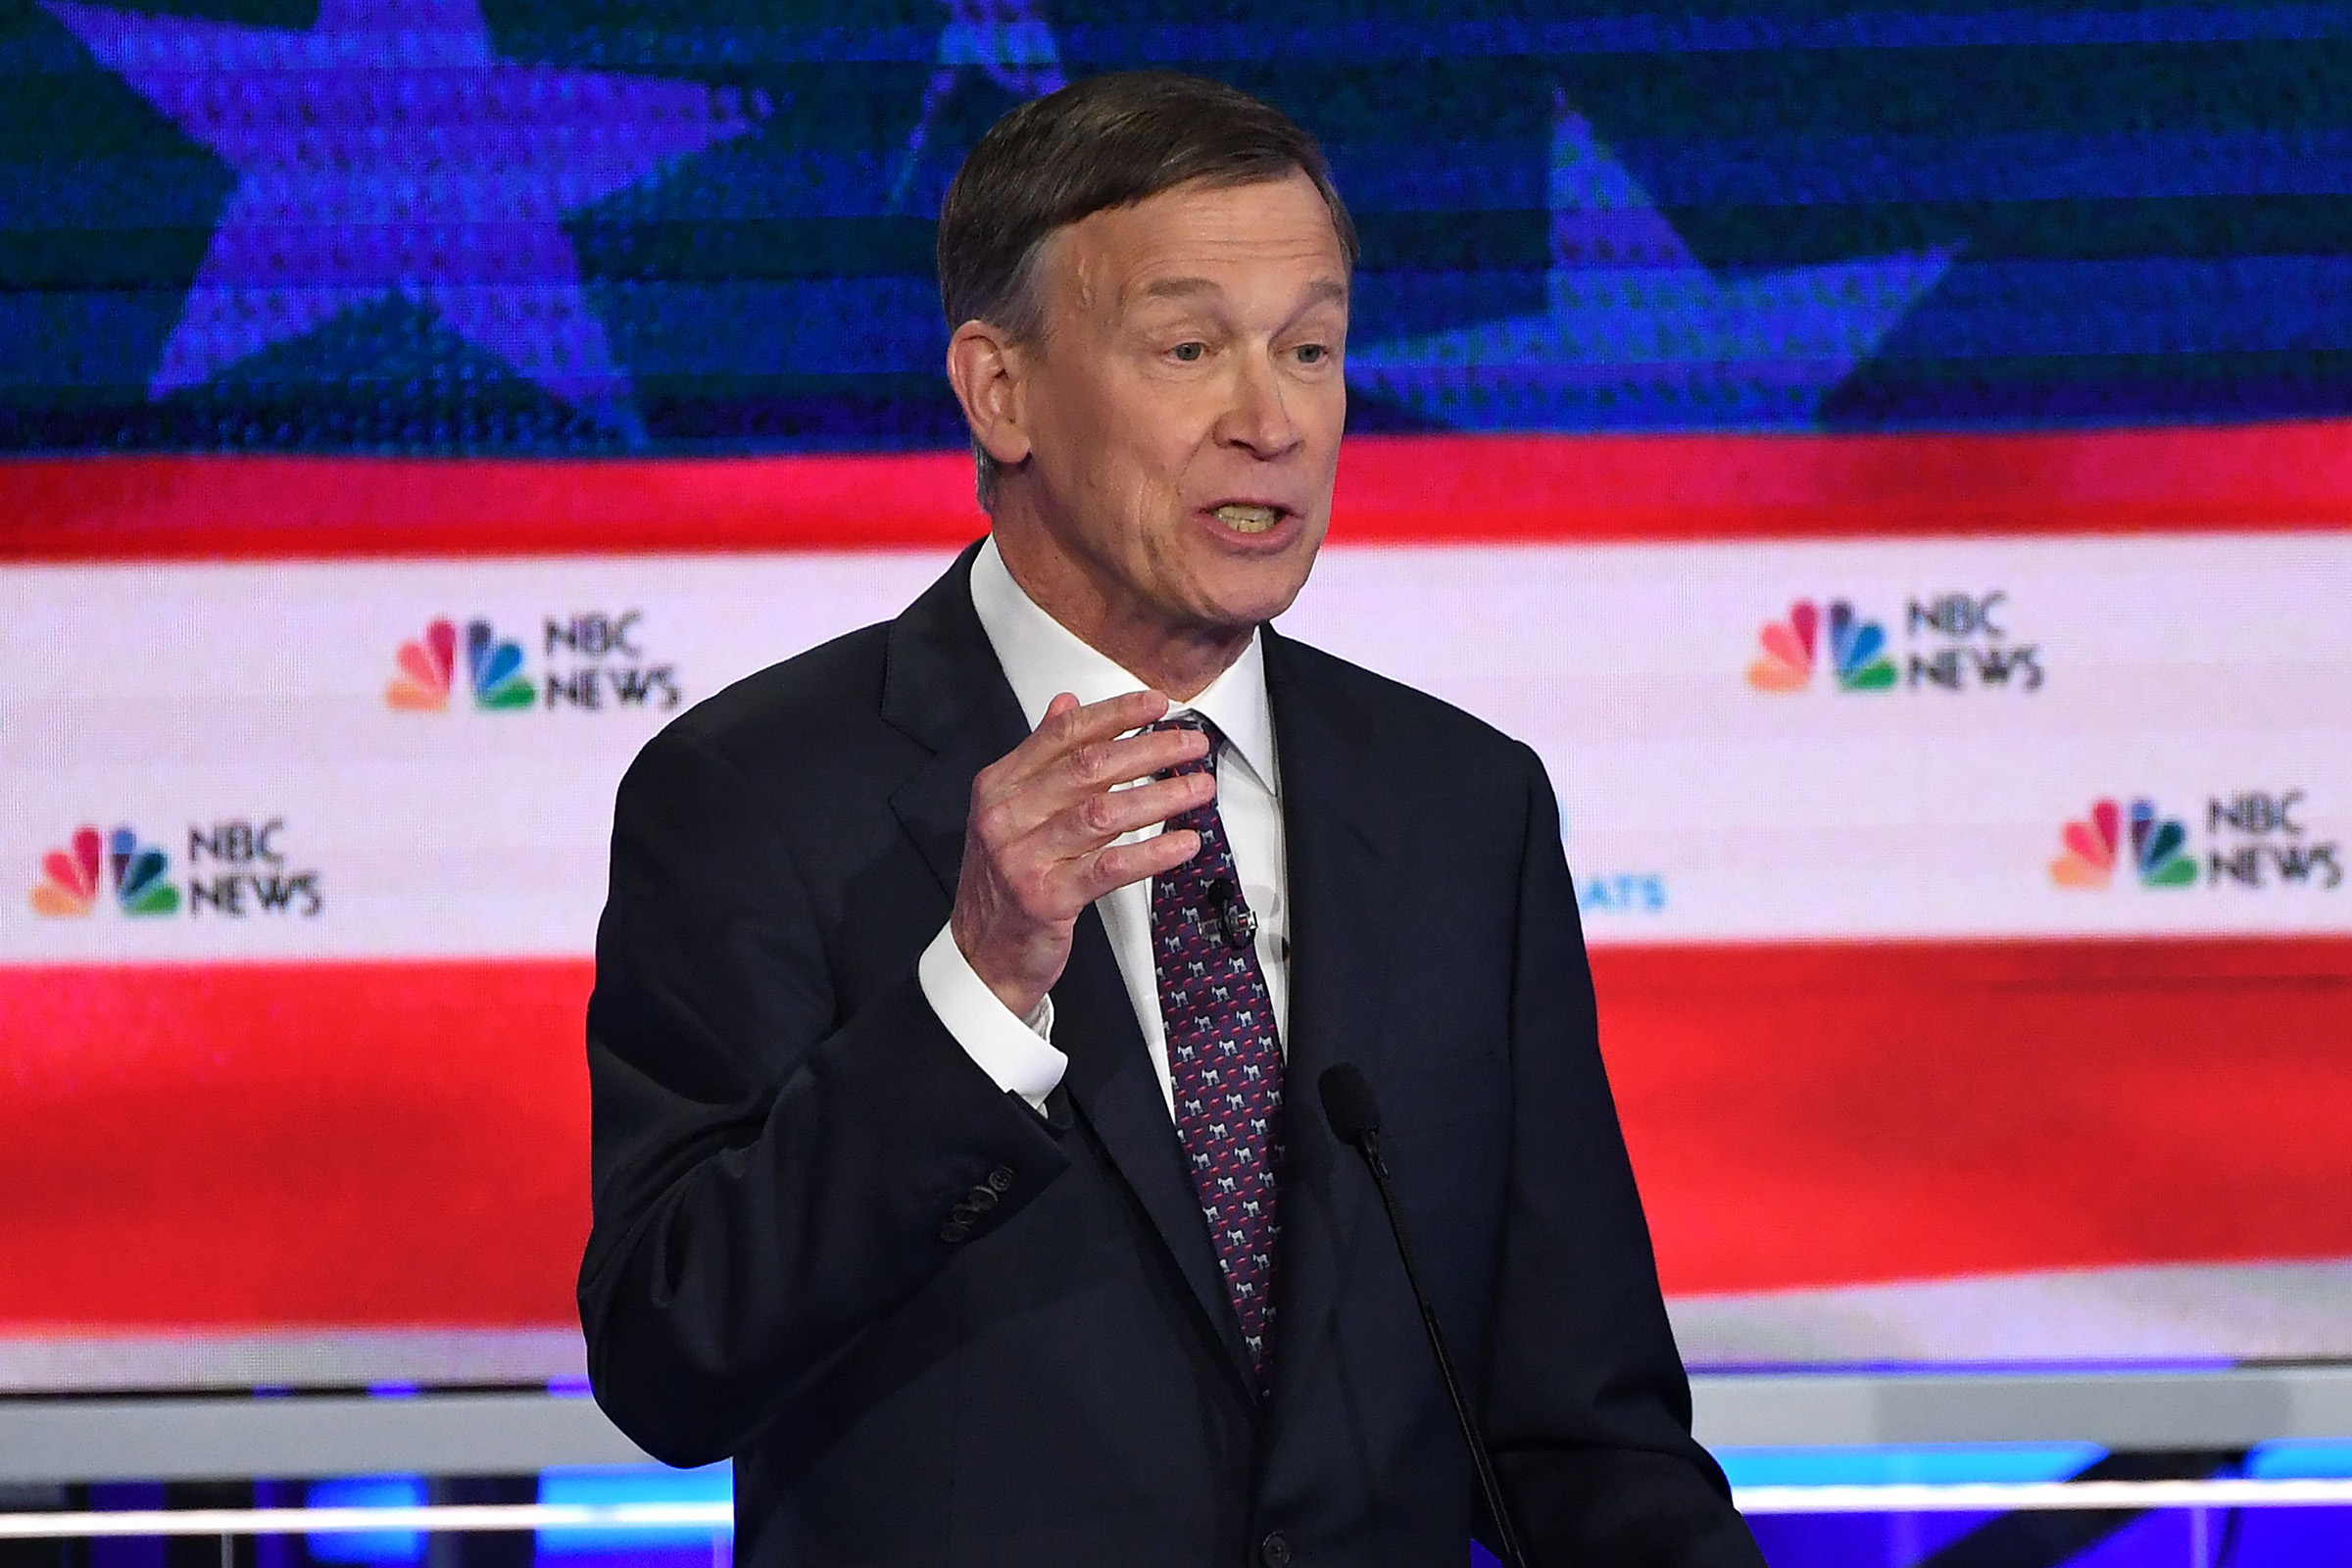 Democratic presidential hopeful former Governor of Colorado John Hickenlooper speaks during the second Democratic primary debate of the 2020 presidential campaign season hosted by NBC News at the Adrienne Arsht Center for the Performing Arts in Miami, Florida, June 27, 2019. (Saul Loeb—AFP/Getty Images)